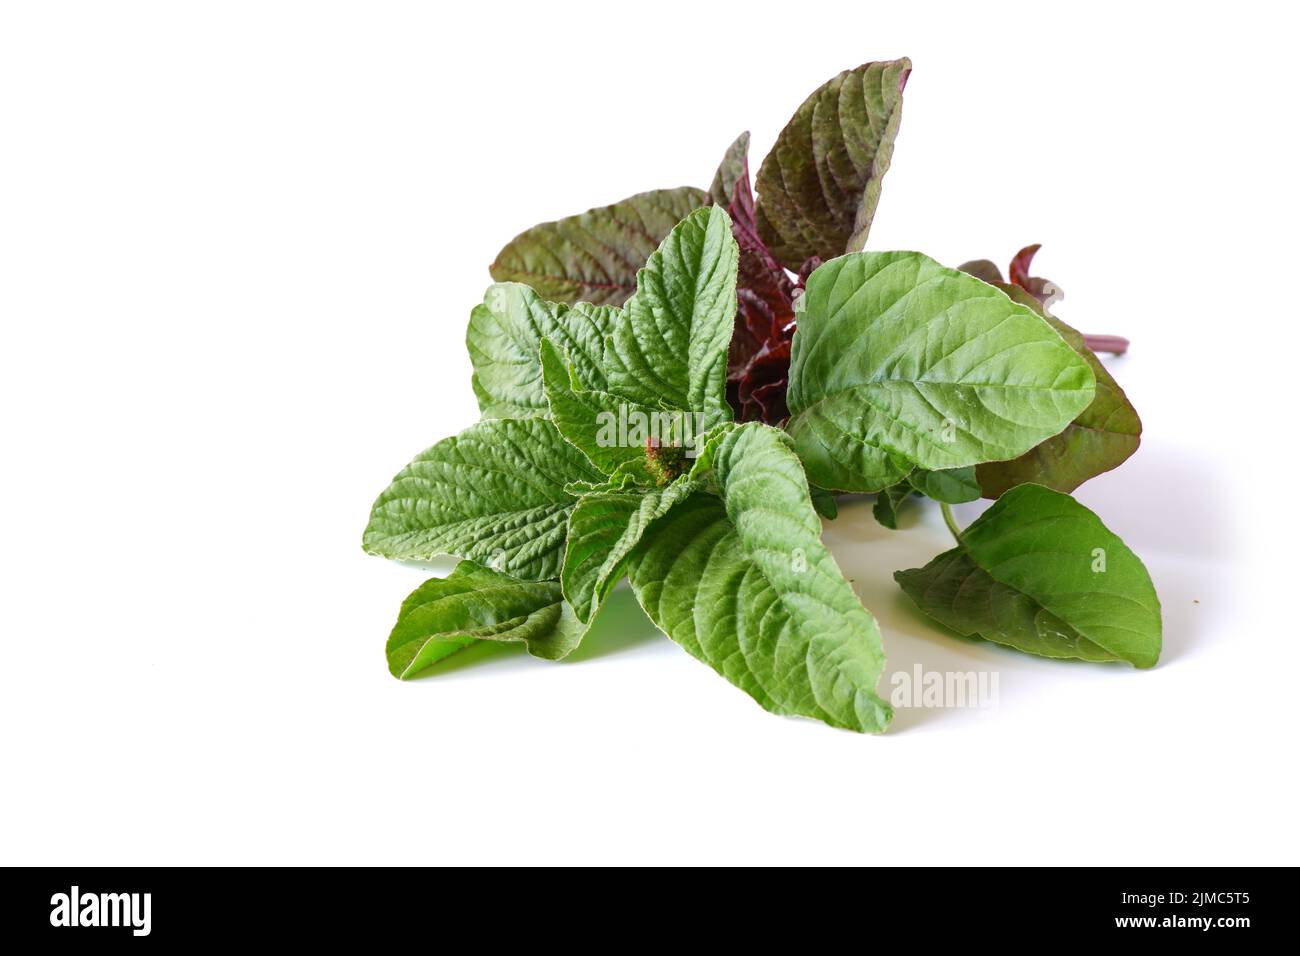 Leaves of green and red amaranth on a white background. Ingredients for cooking recipes and dishes. Stock Photo